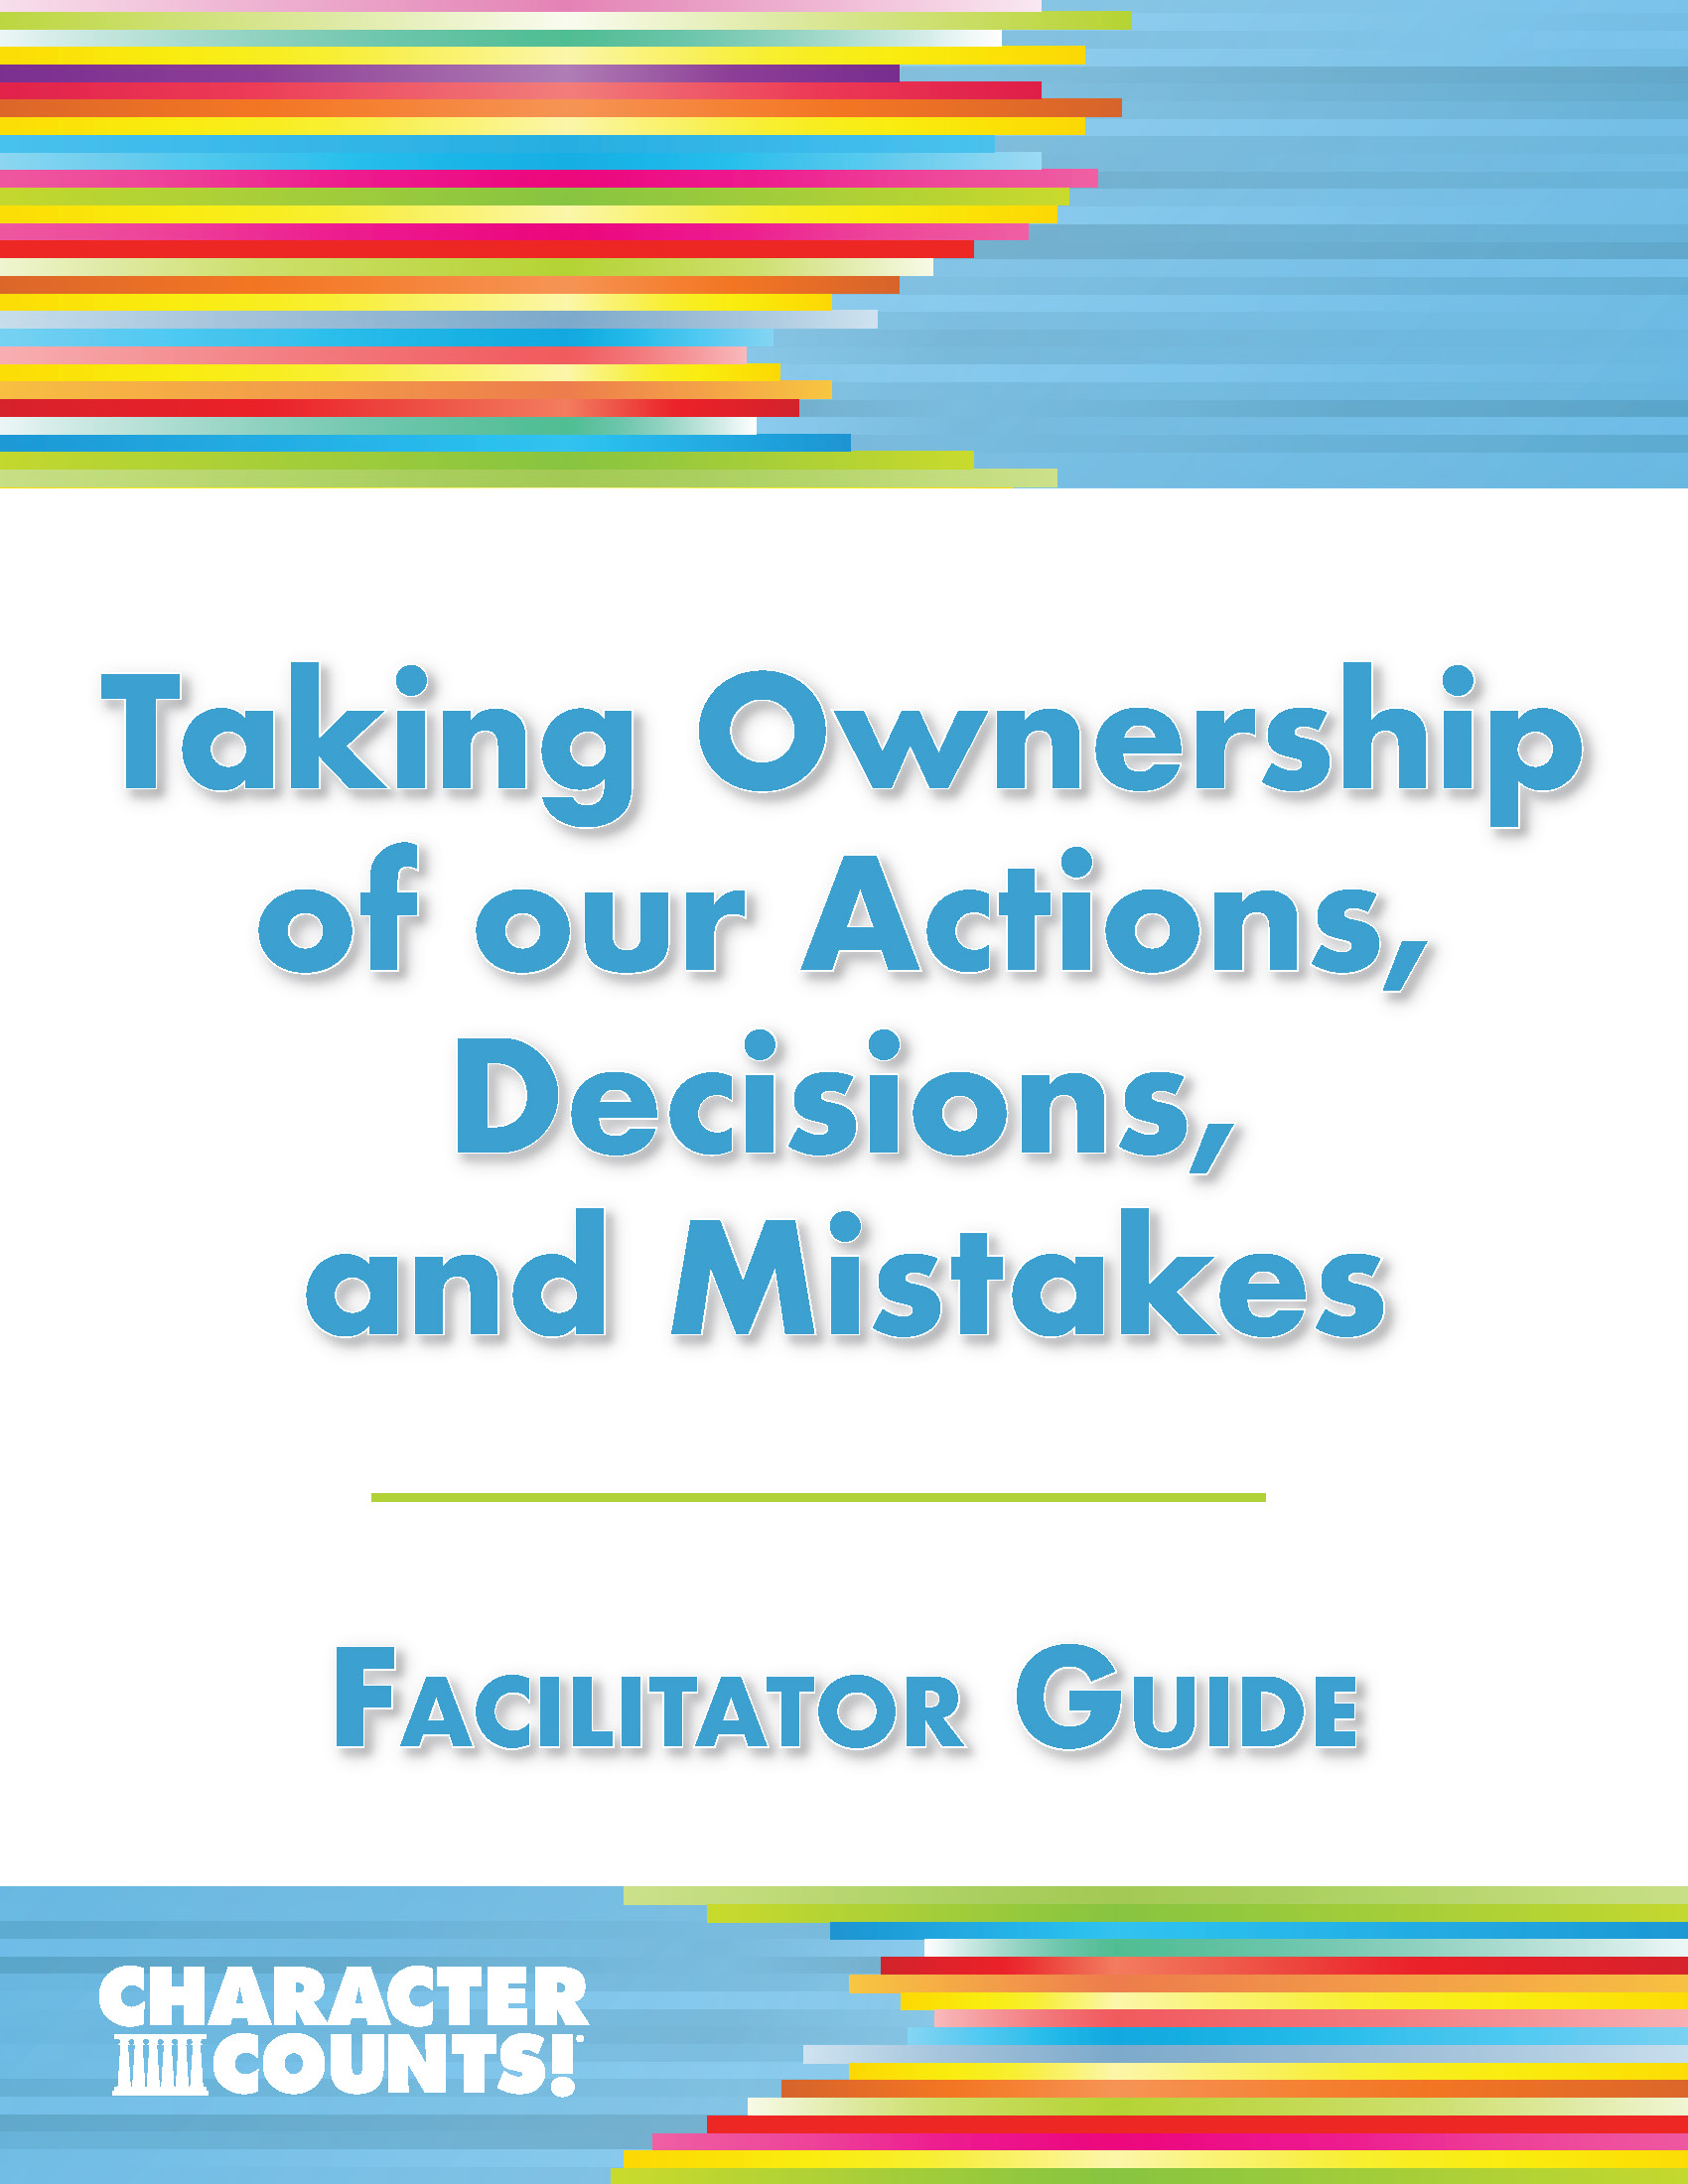 Taking Ownership of our Actions, Decisions, and Mistakes